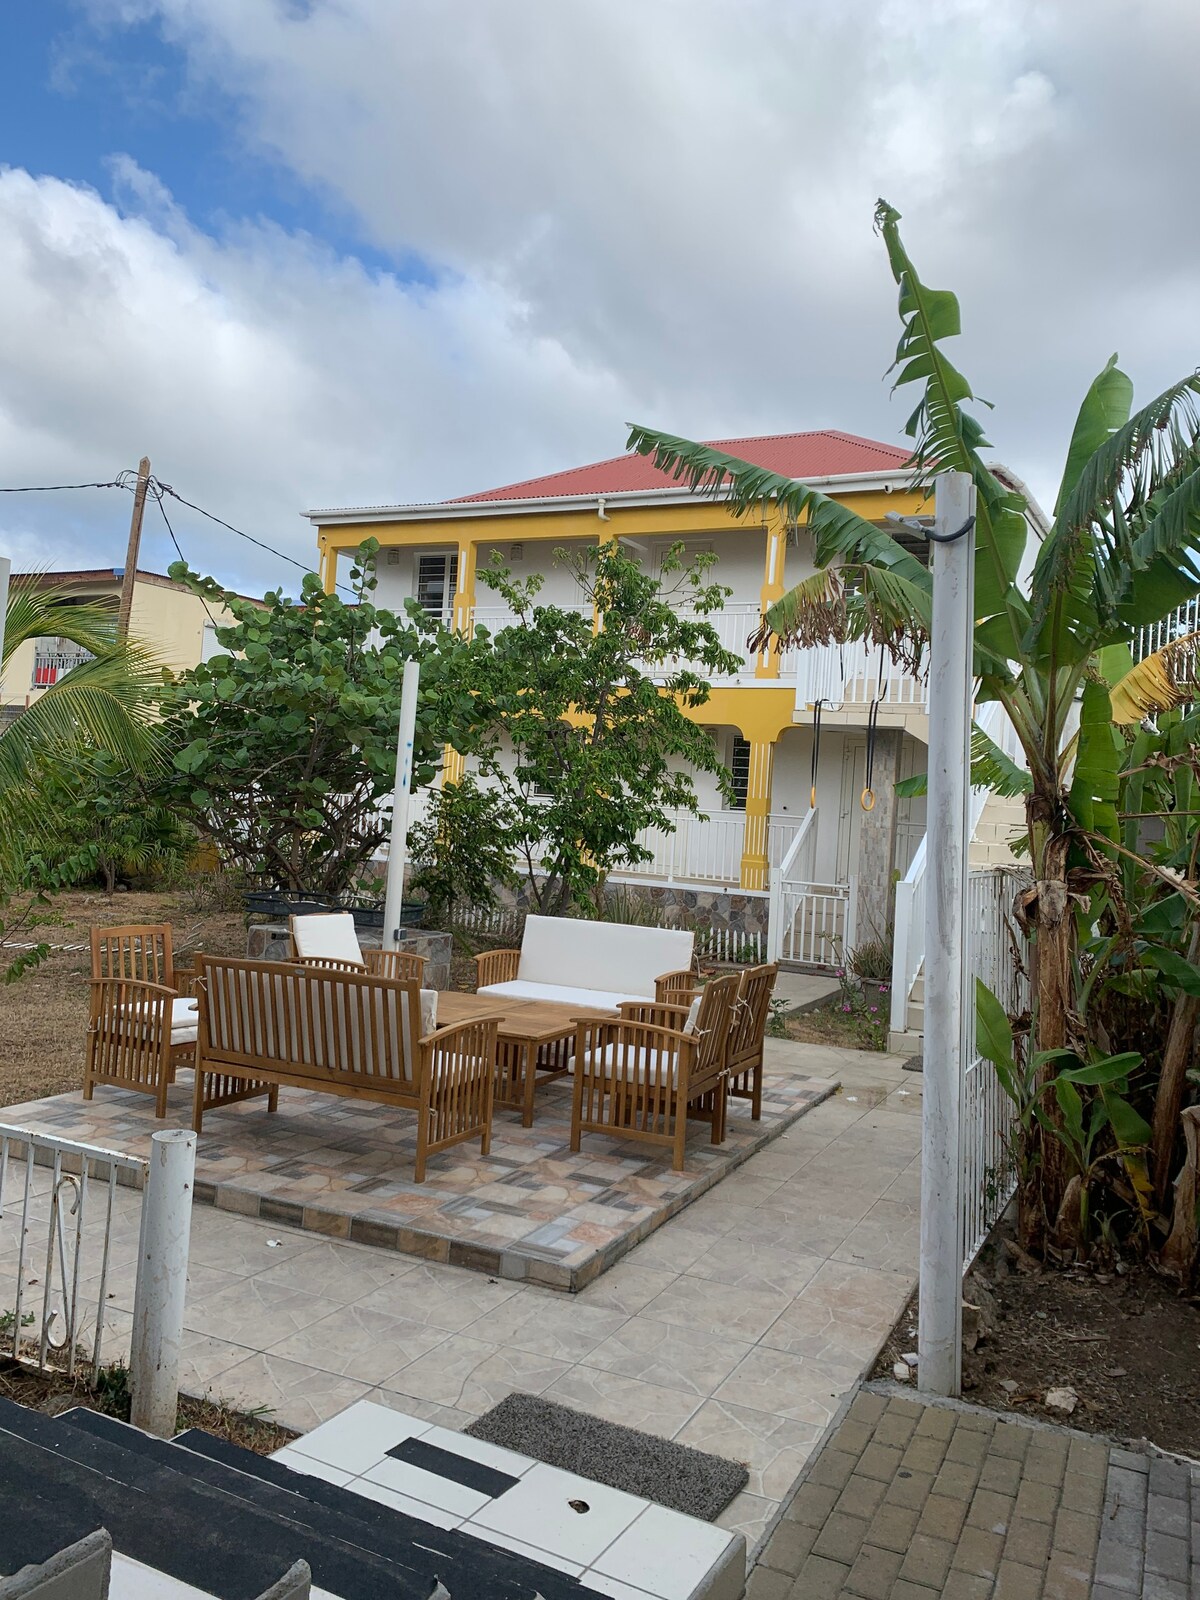 Stay in the heart of Marigot "St. Martin" style